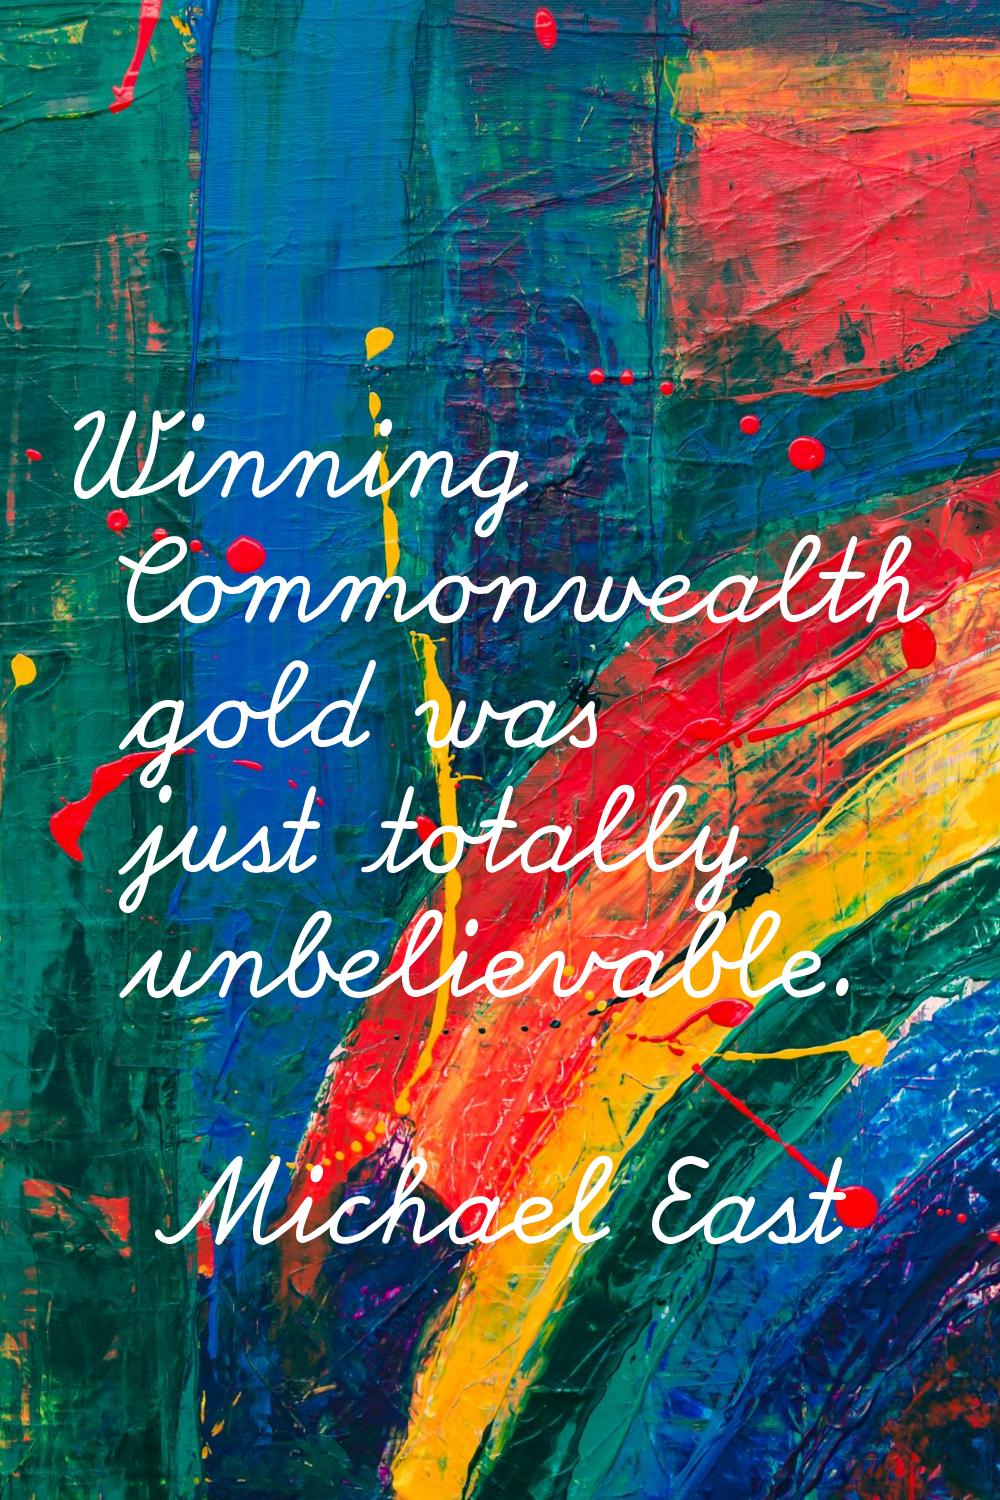 Winning Commonwealth gold was just totally unbelievable.